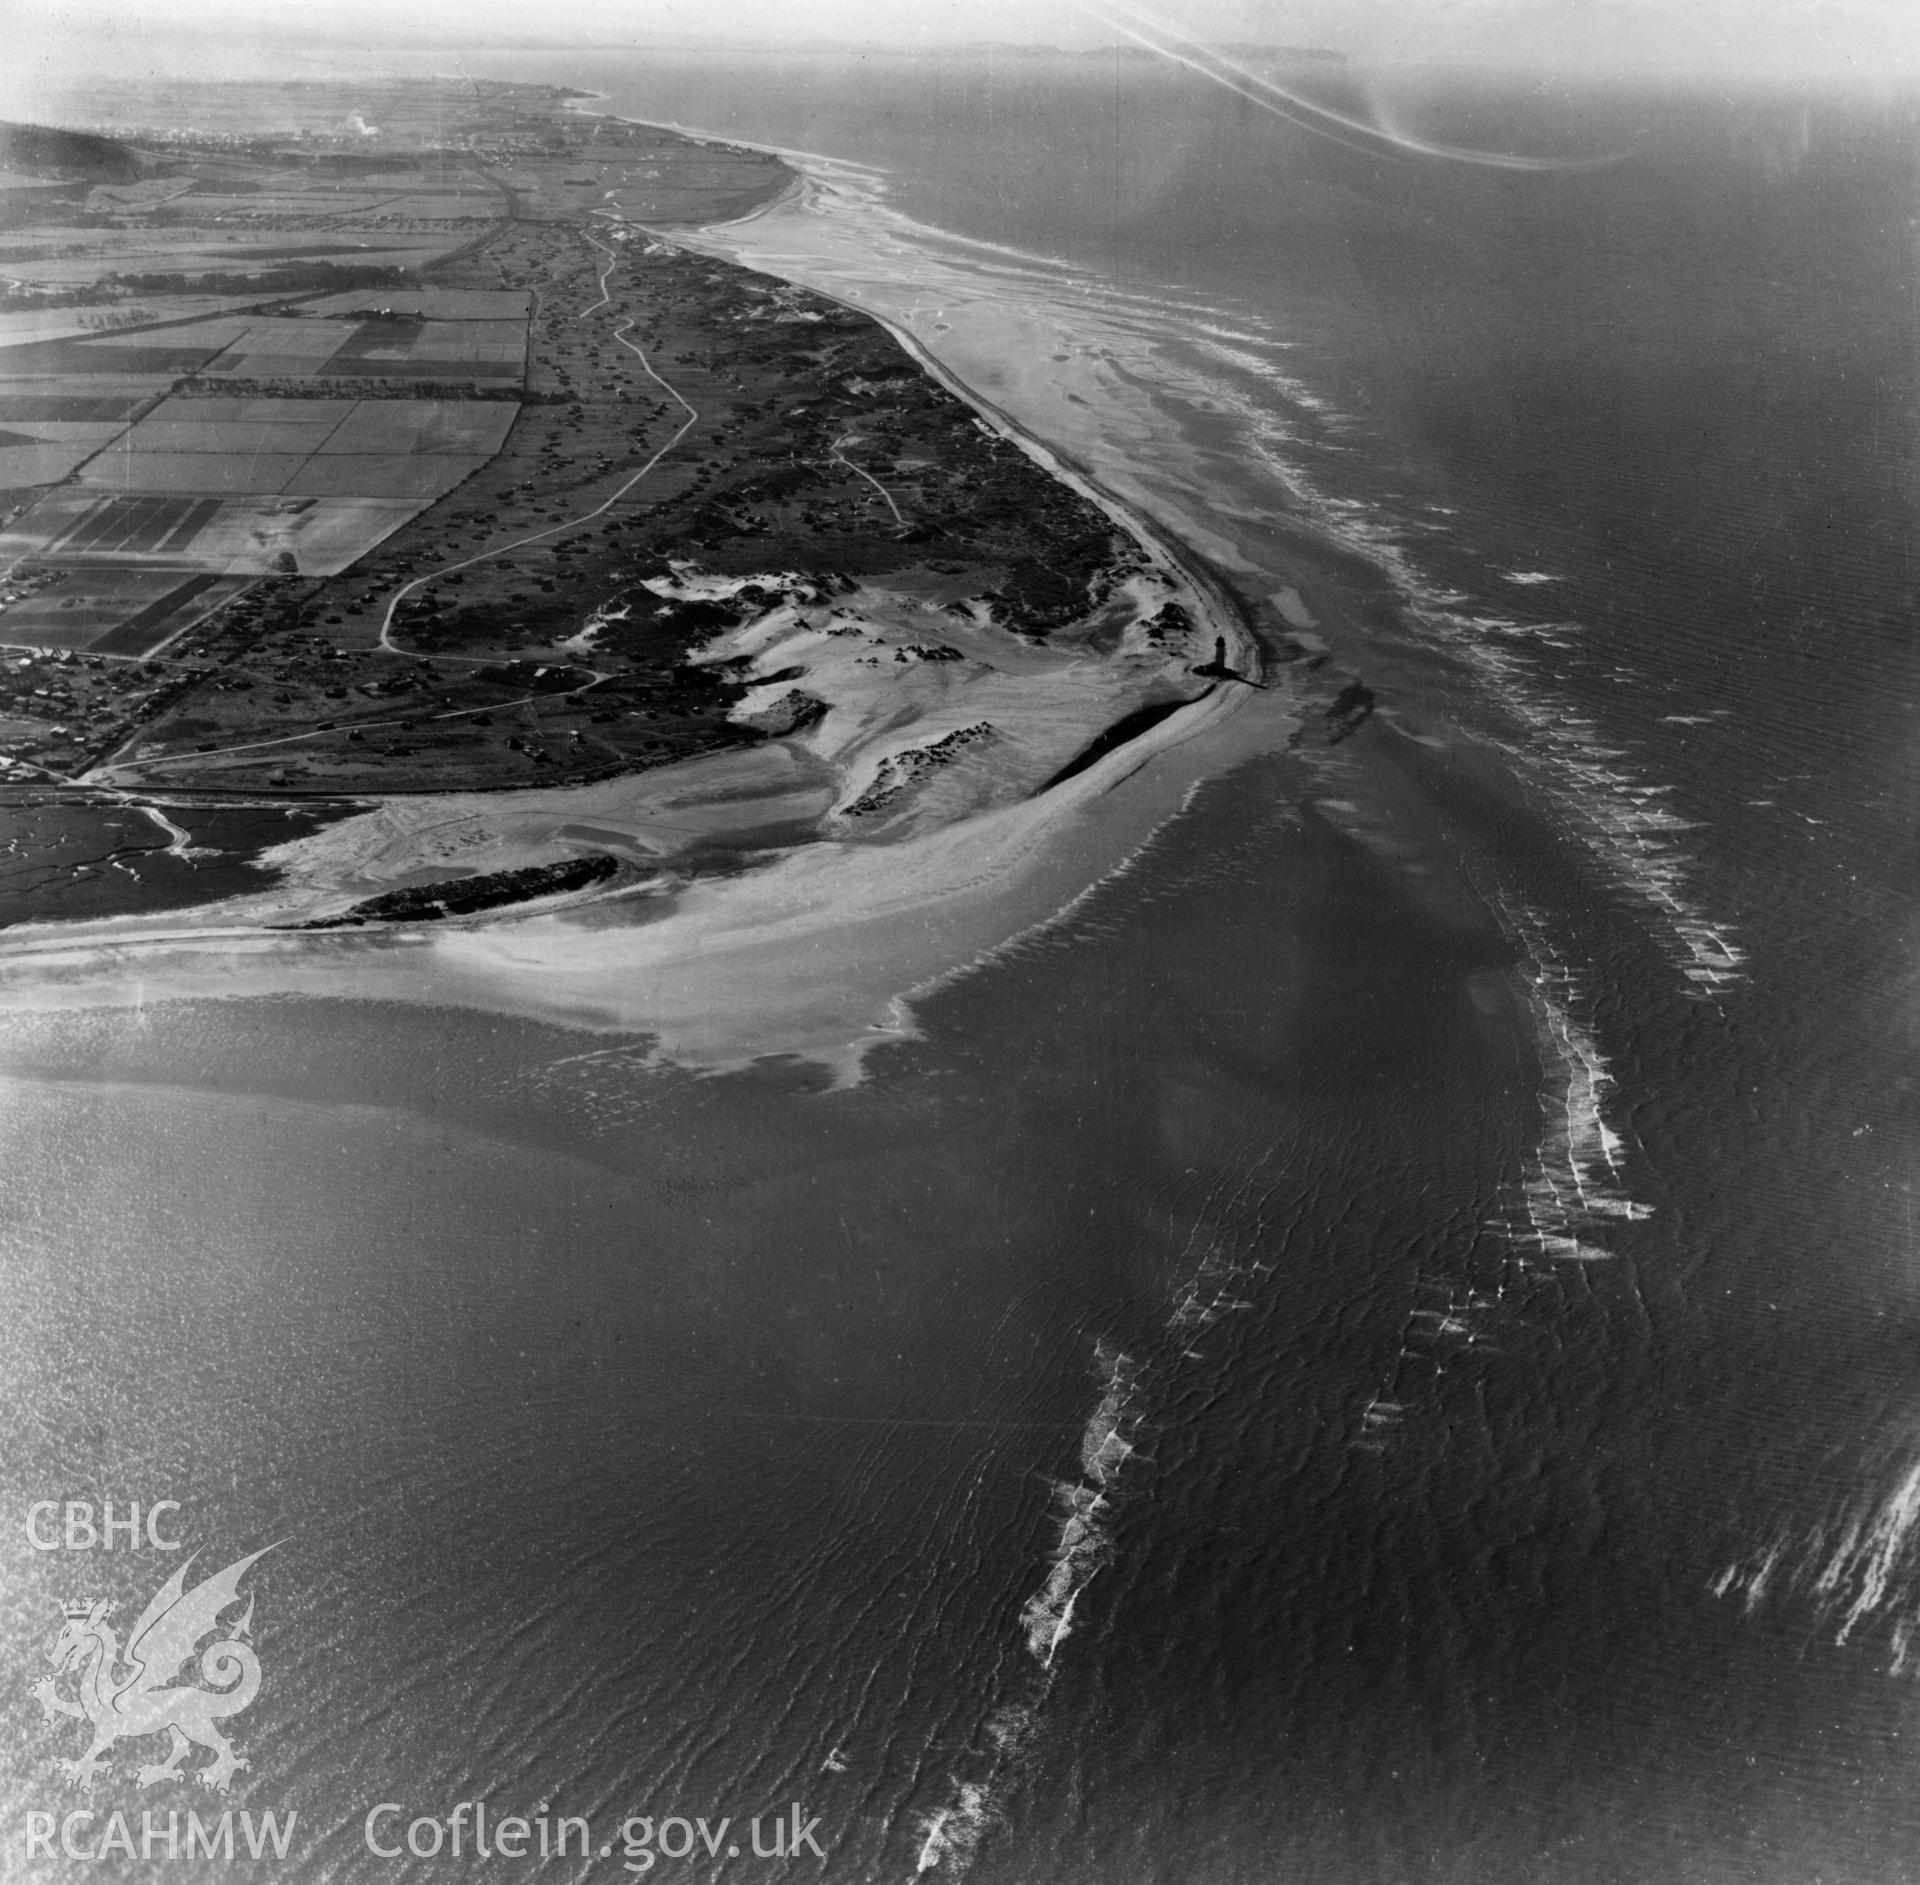 View of Point of Ayr lighthouse with caravans. Oblique aerial photograph, 5?" cut roll film.